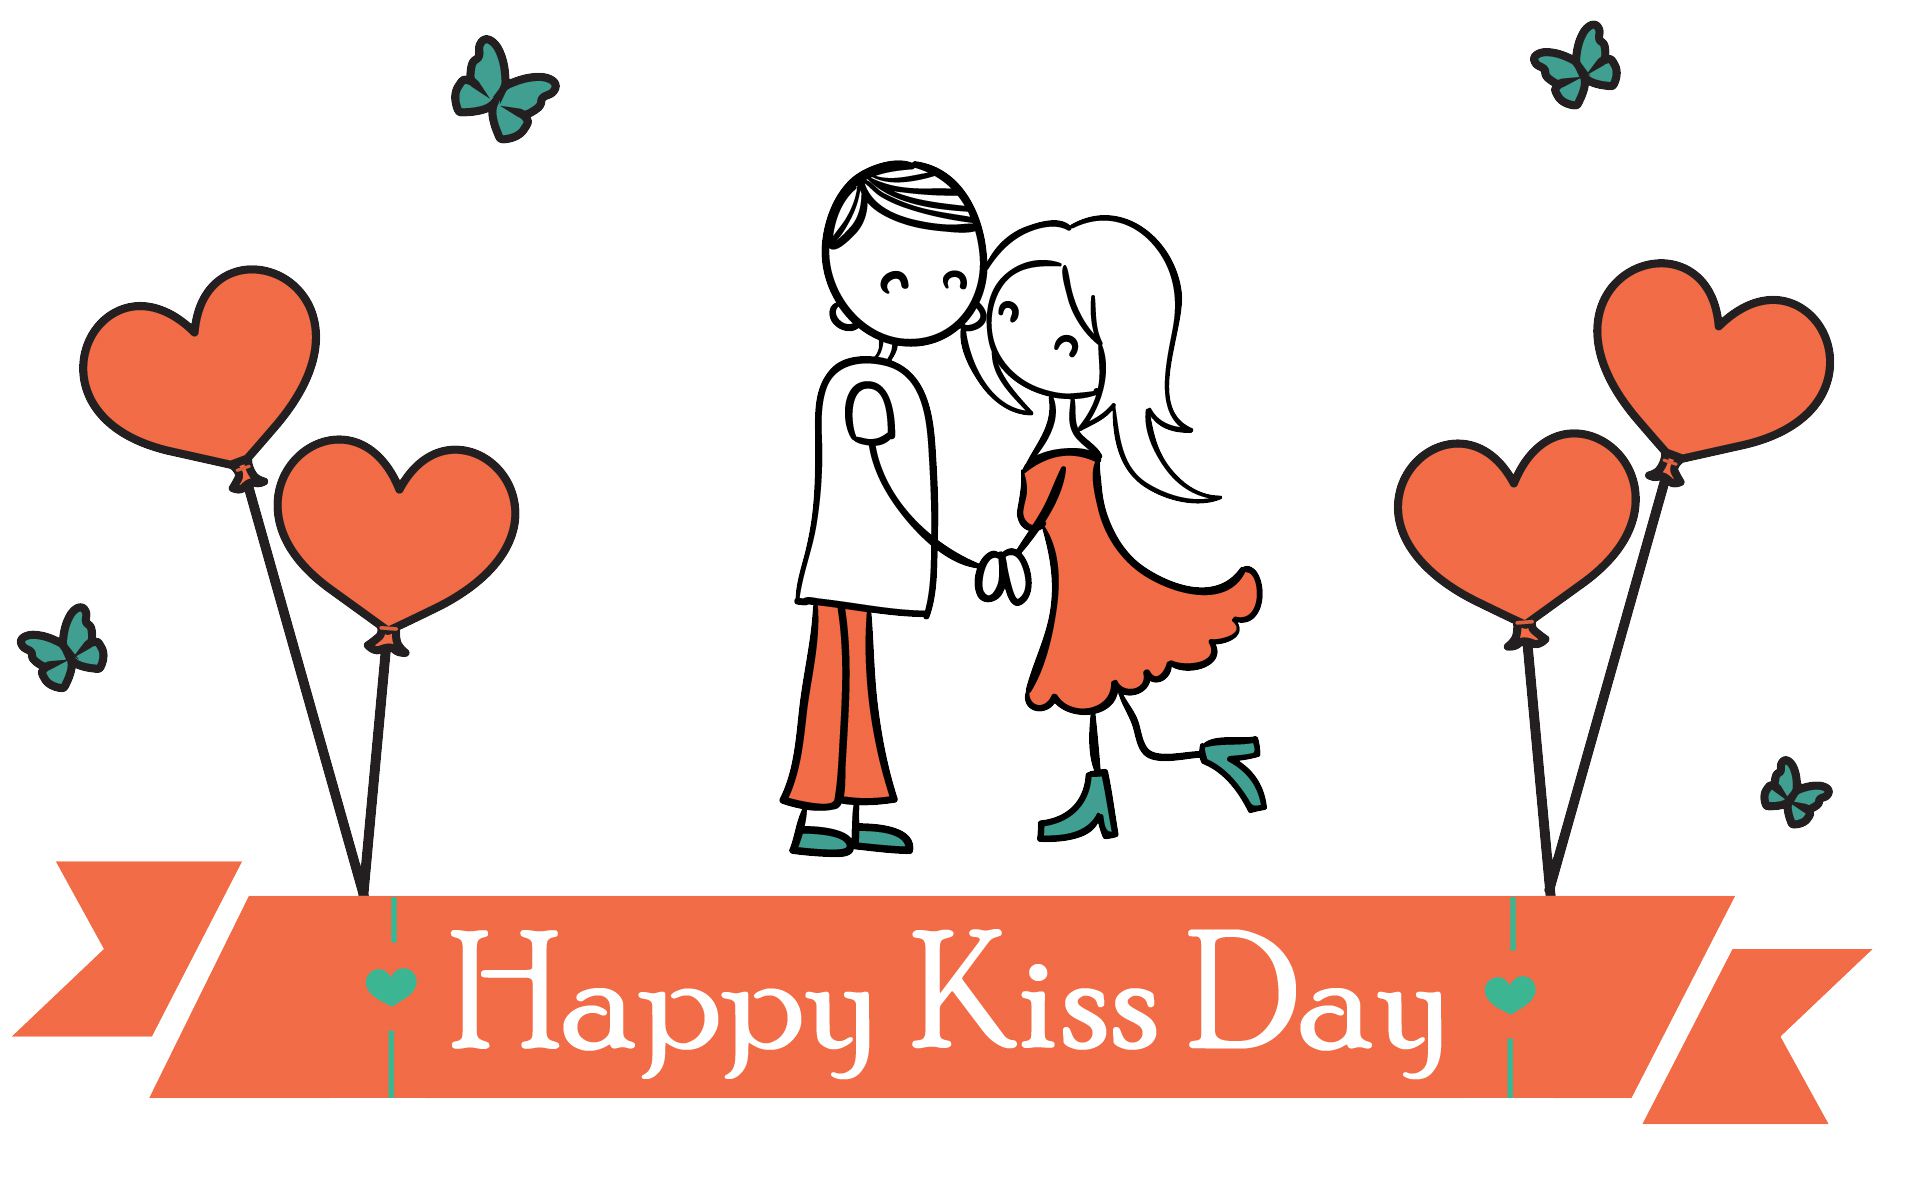 Happy Kiss Day clipart wallpaper